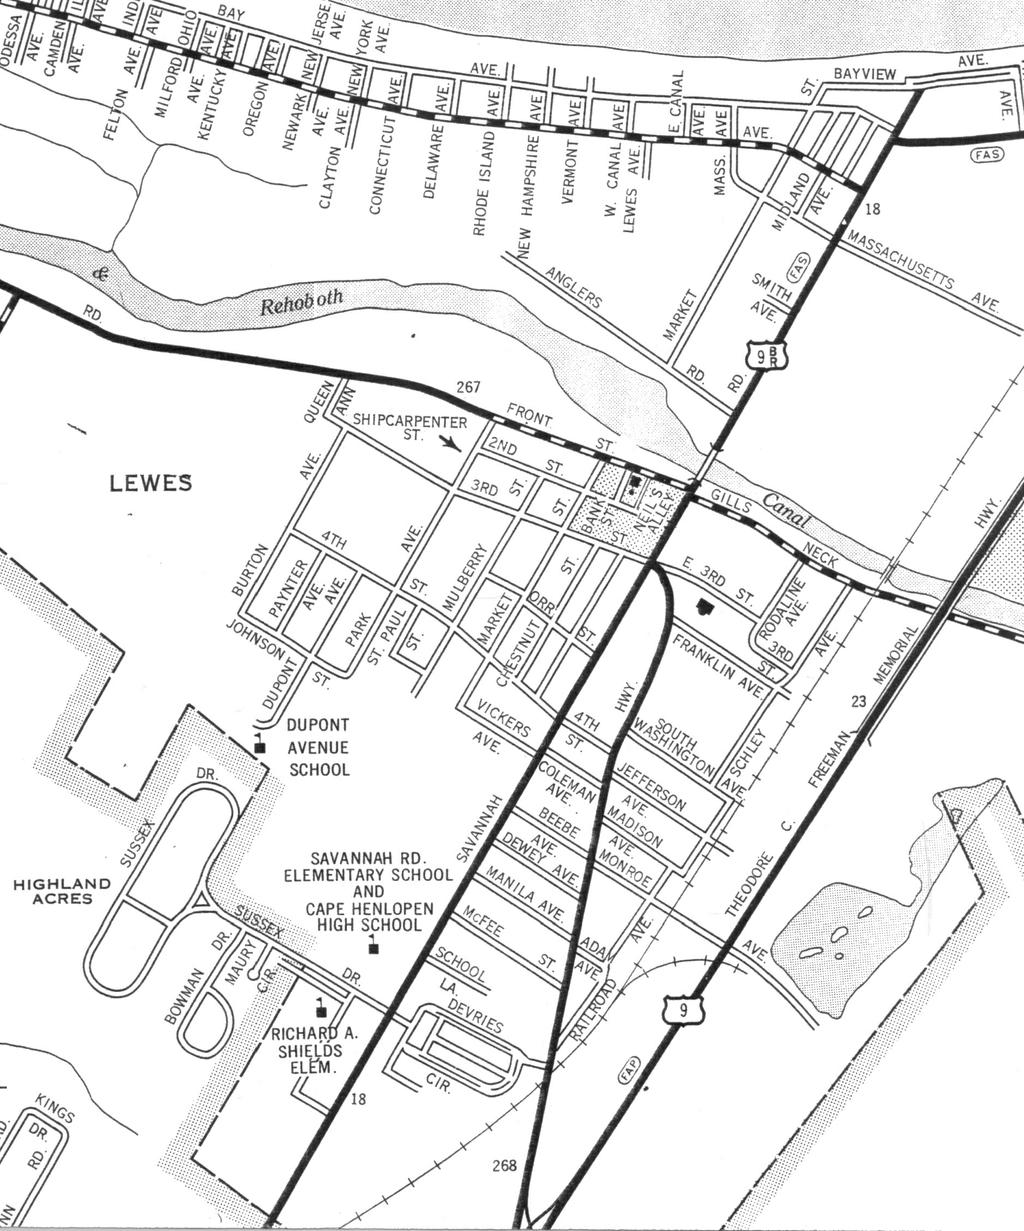 DATE 9-13-18 SITE REVISION ISSUED FOR PERMIT PARTIAL RENOVATION FOR: NO. 1 LEWES STREETS DEPT.